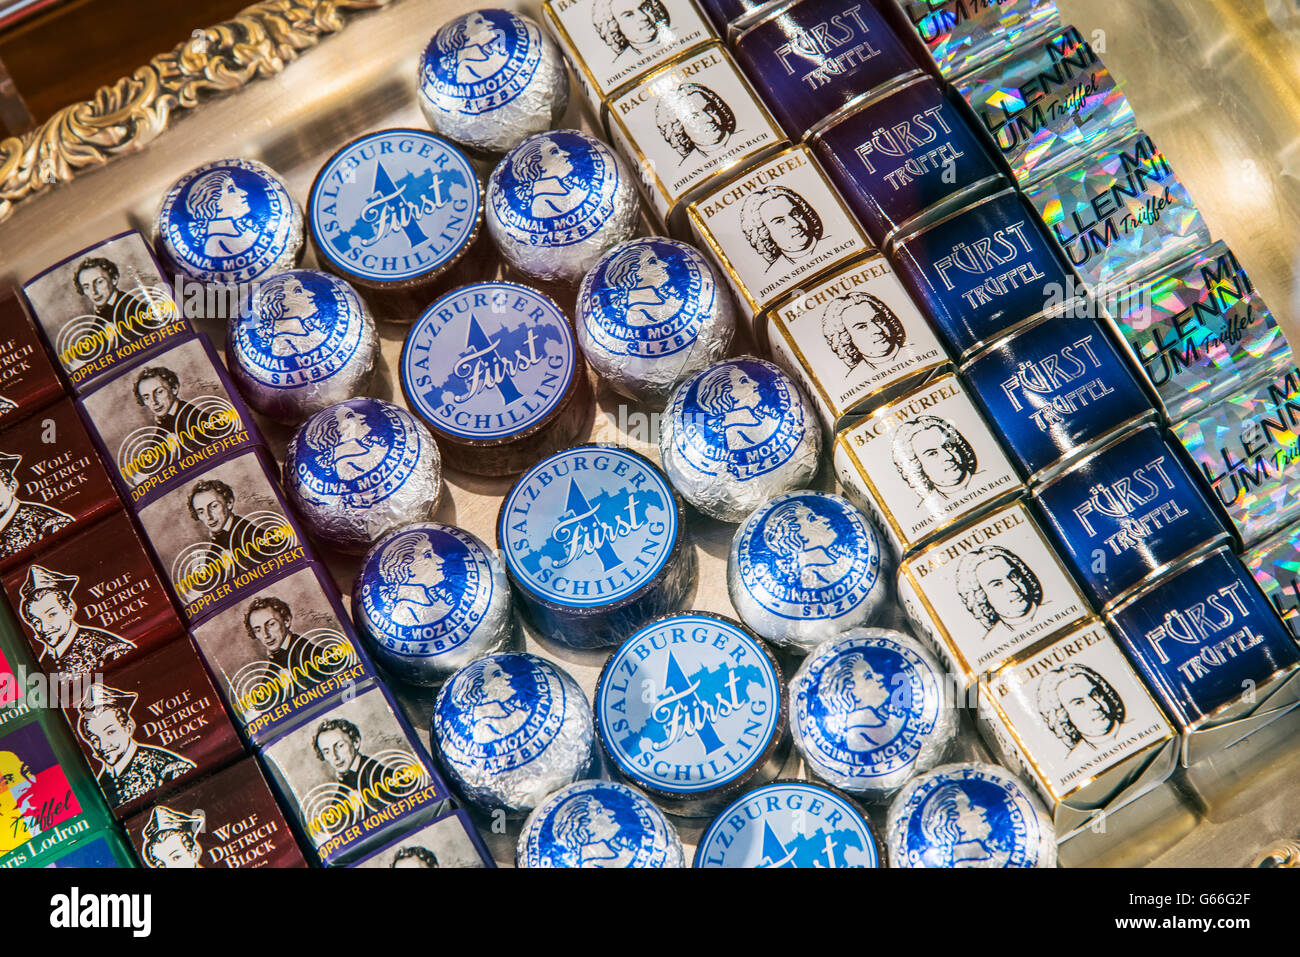 Mozartkugeln and more chocolate on display in the window shop of the historical Furst pastry shop in Salzburg, Austria Stock Photo